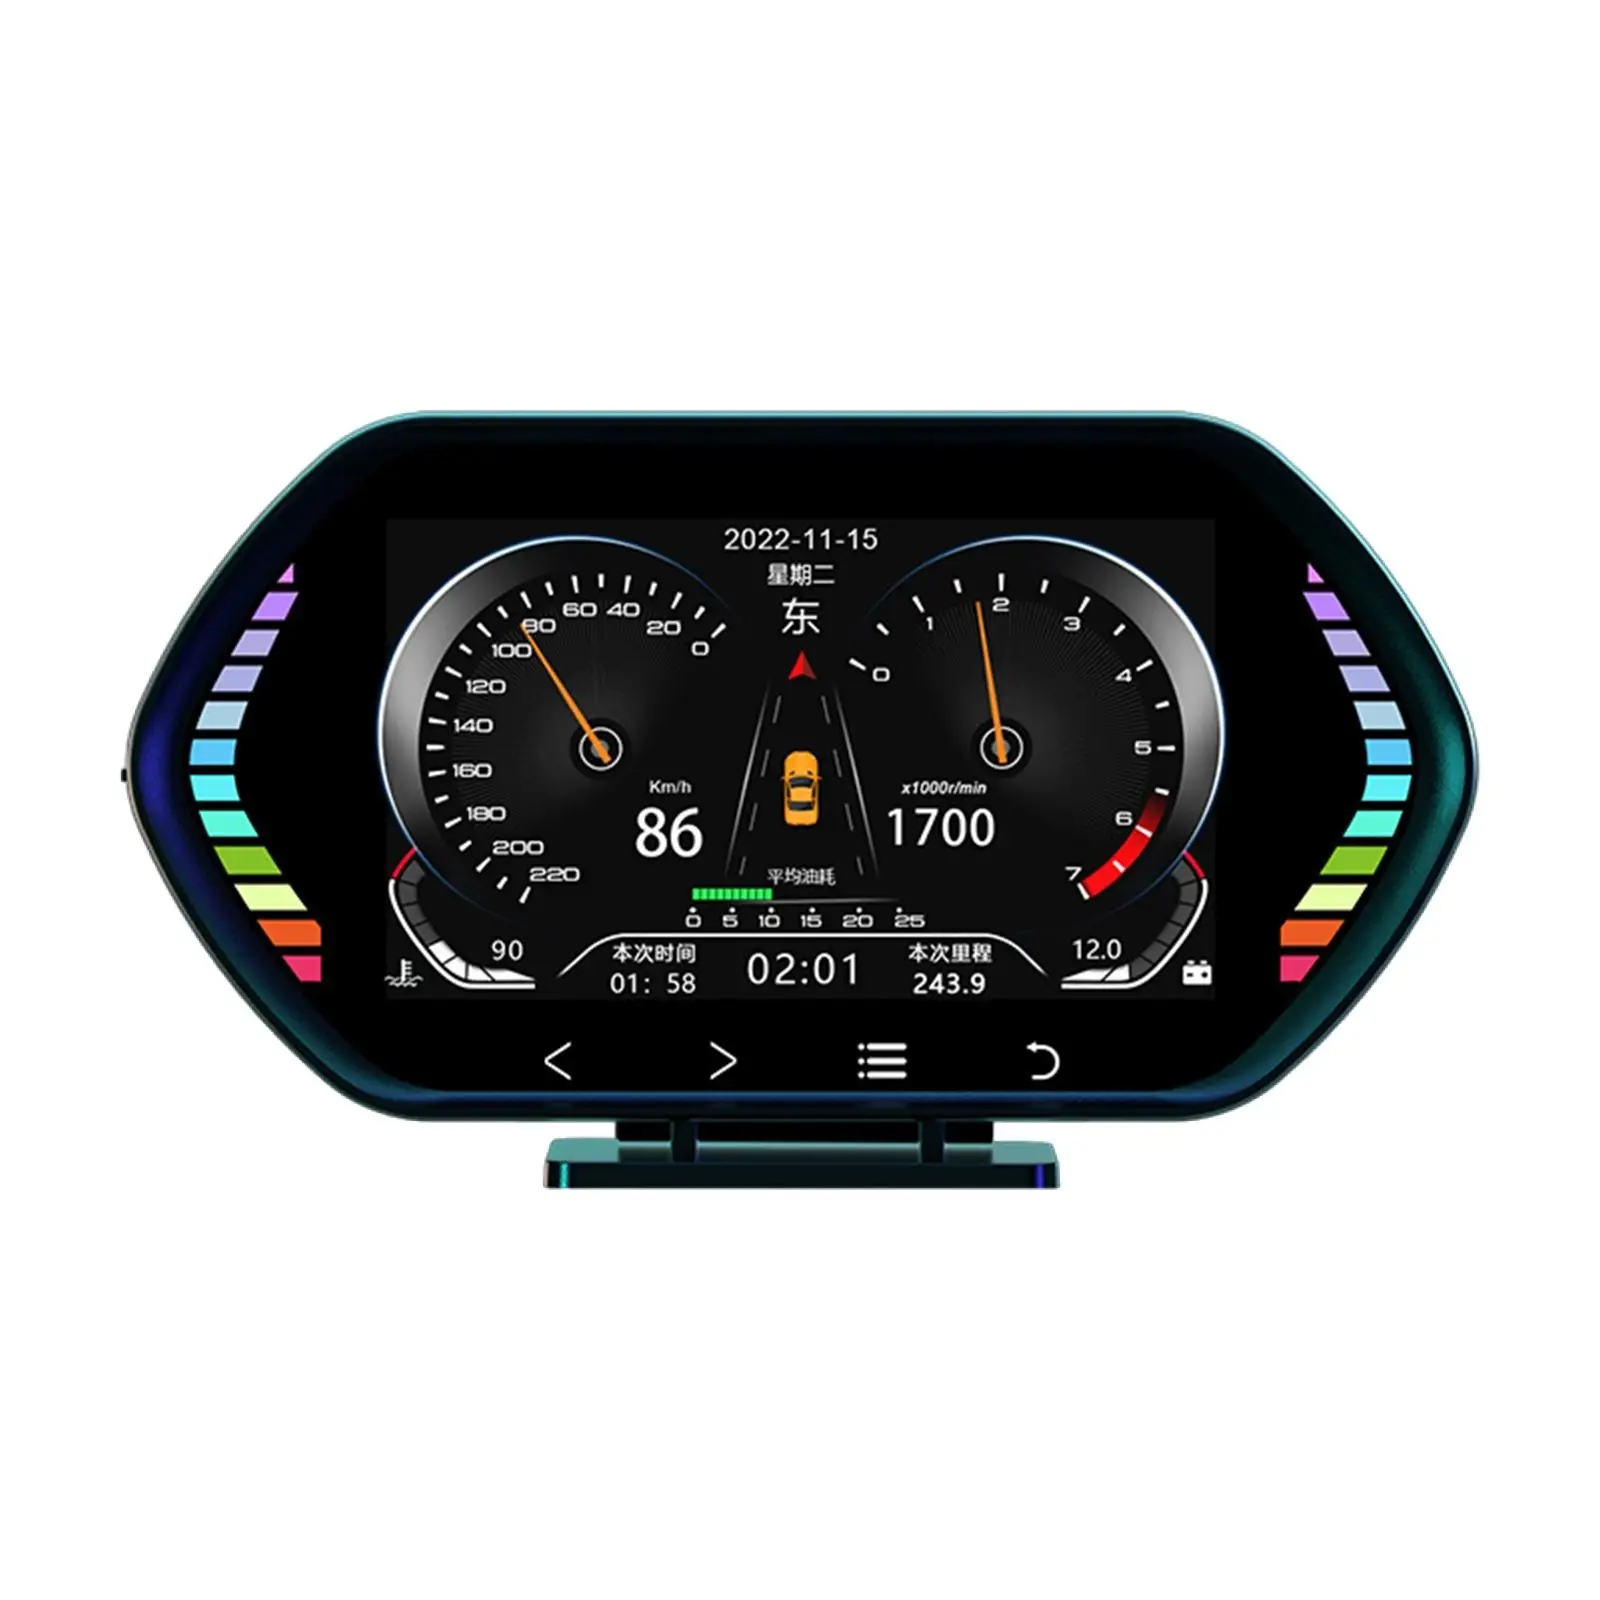 OBD2 Gauge Display Troubleshooting with Ambient Light Multifunctional Head up Display Digital Speedometer for Most Vehicles